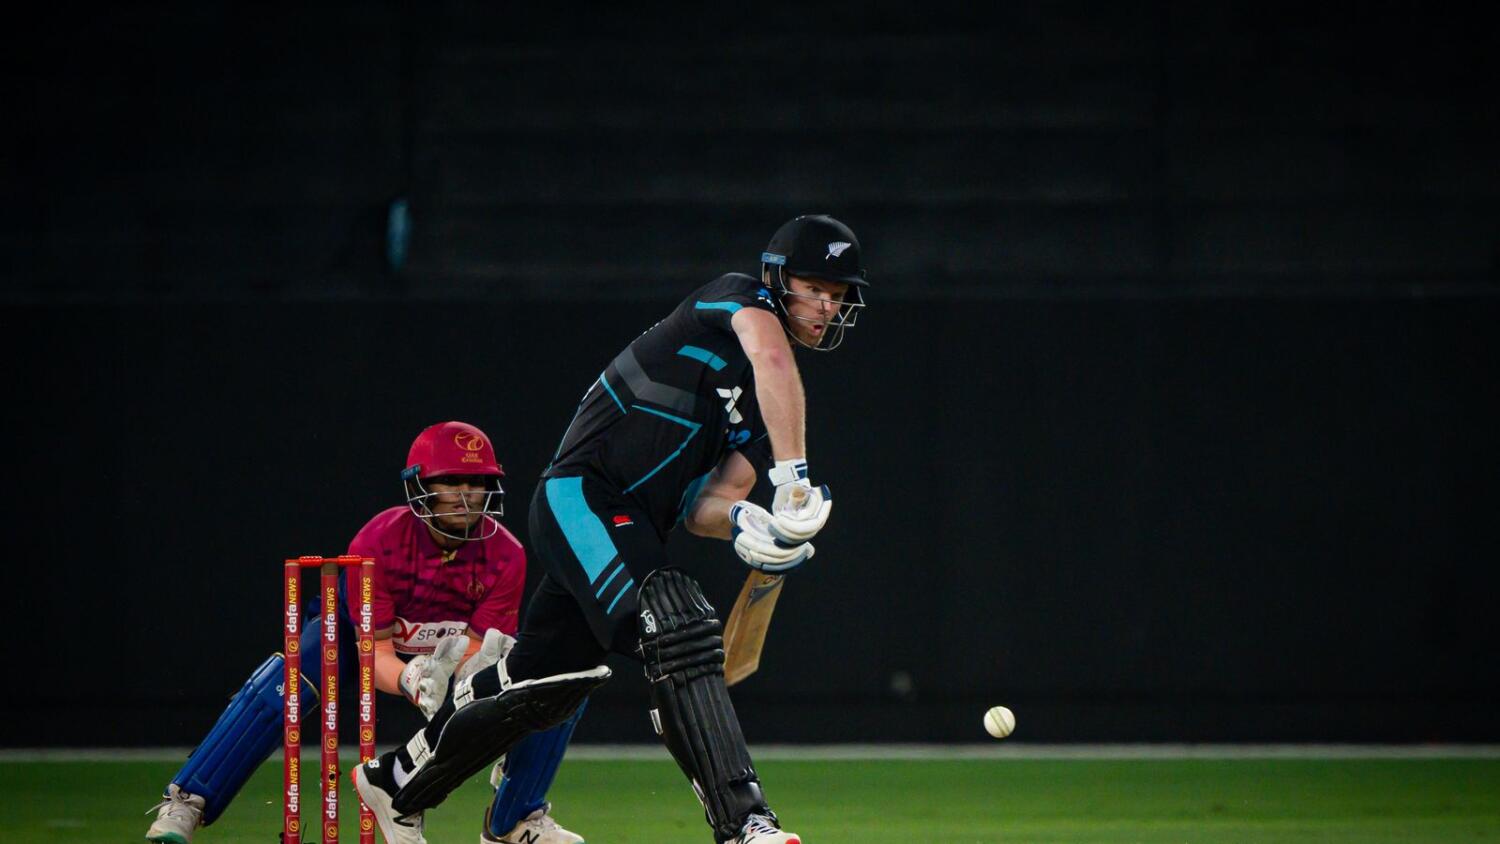 New Zealand's James Neesham in action while playing against UAE during the second T20I match at Dubai International Stadium on Saturday